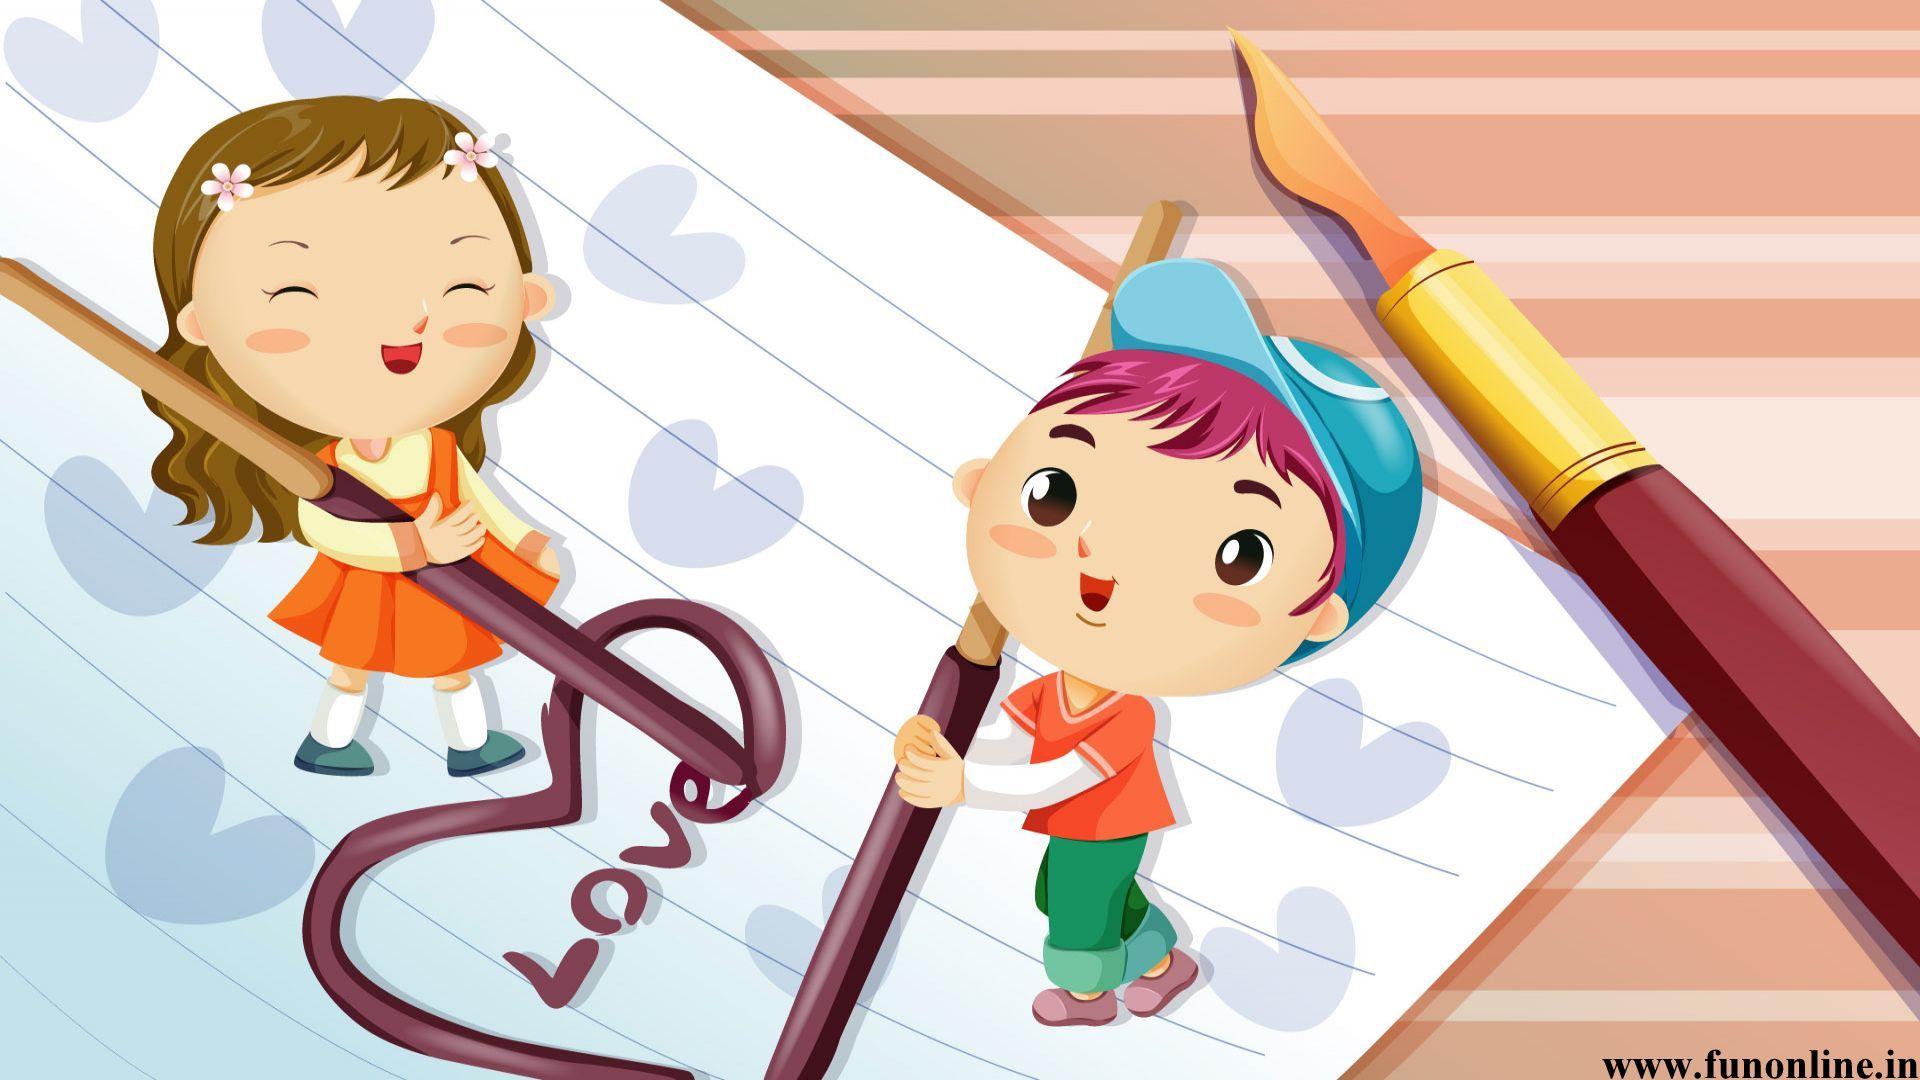 Cartoon Love Wallpapers Charming Cartoon Love HD Wallpapers For Free